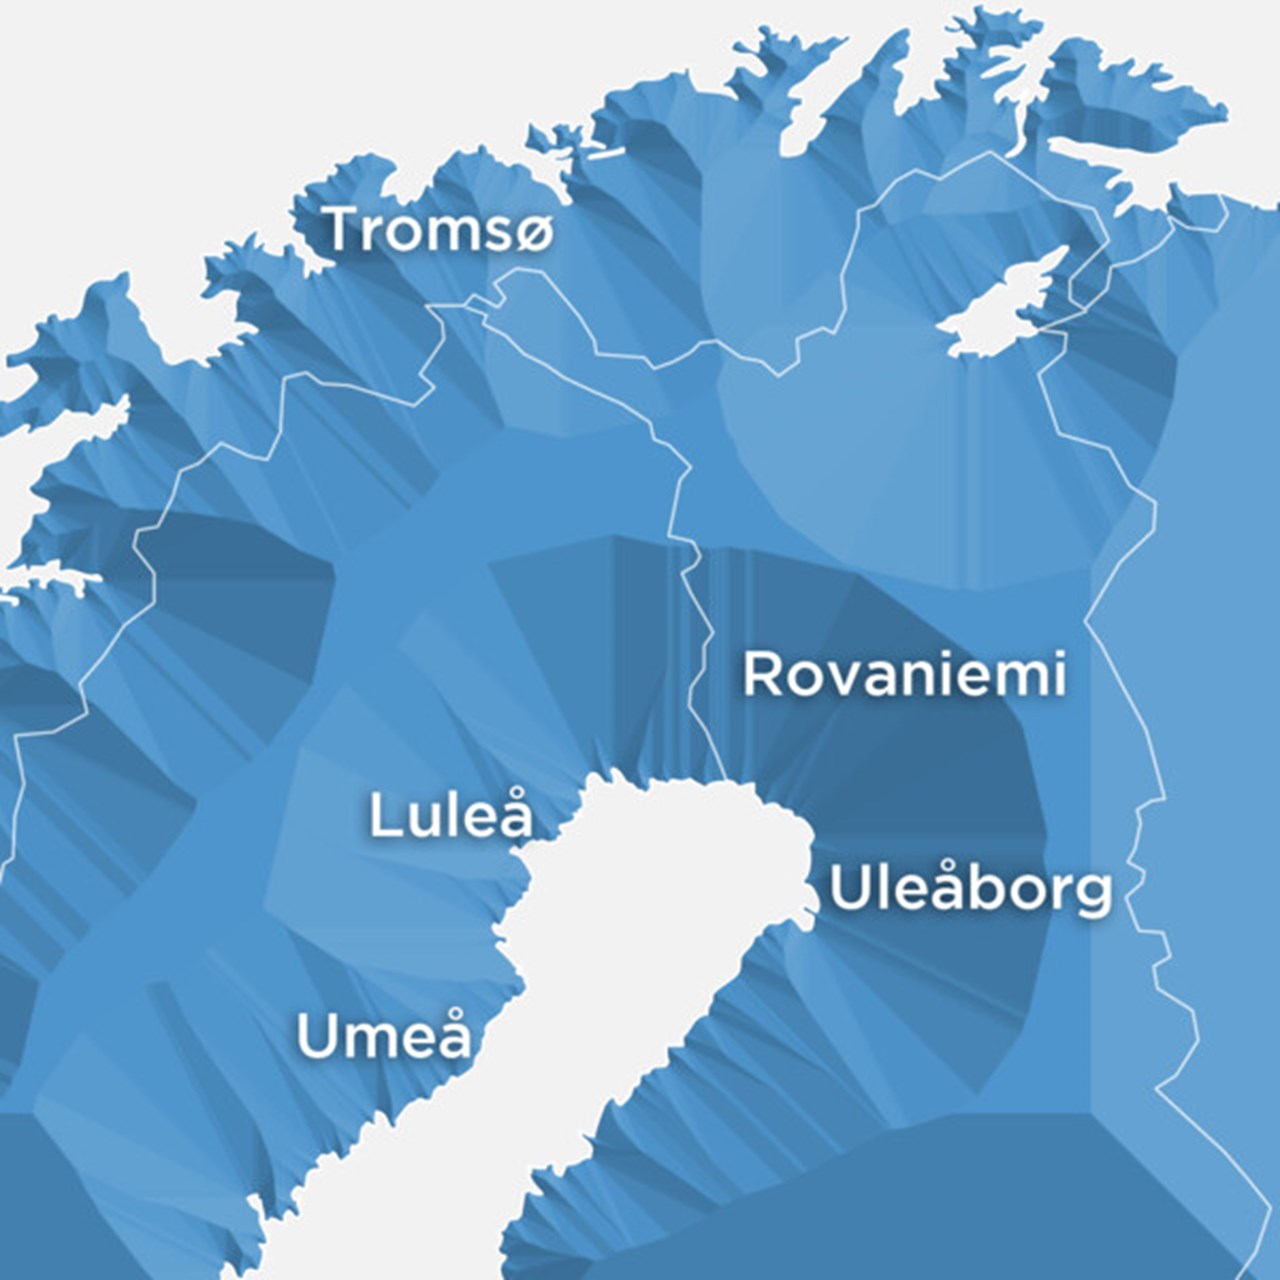 Map of northern Sweden, Norway and Finland with the cities of Umeå, Luleå, Tromsö, Rovaniemi and Oulu marked